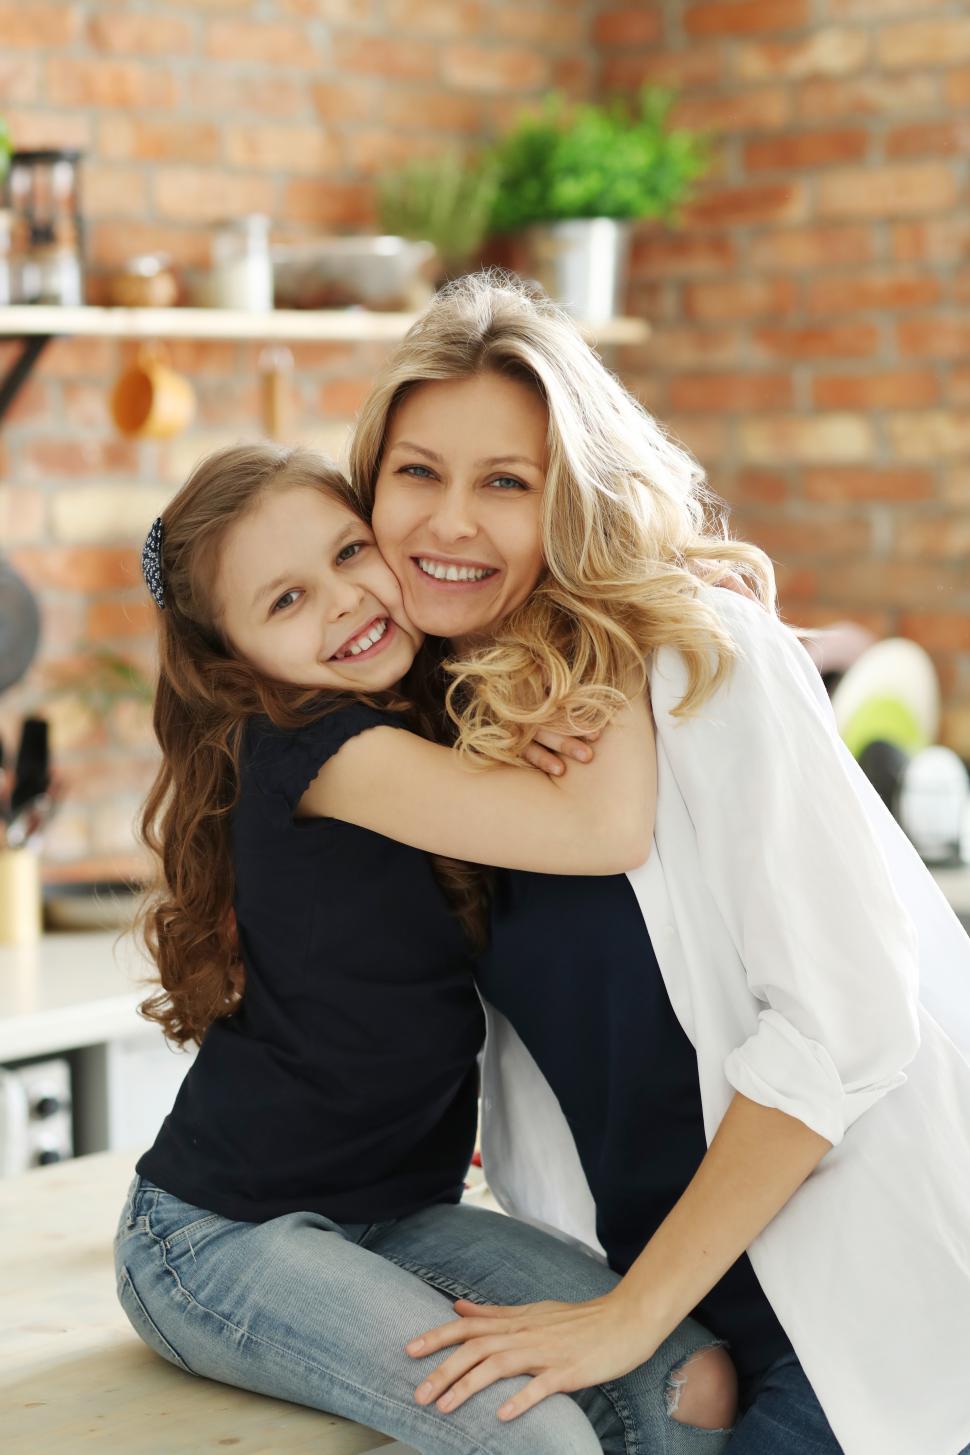 Free Image of Mother and daughter hug 